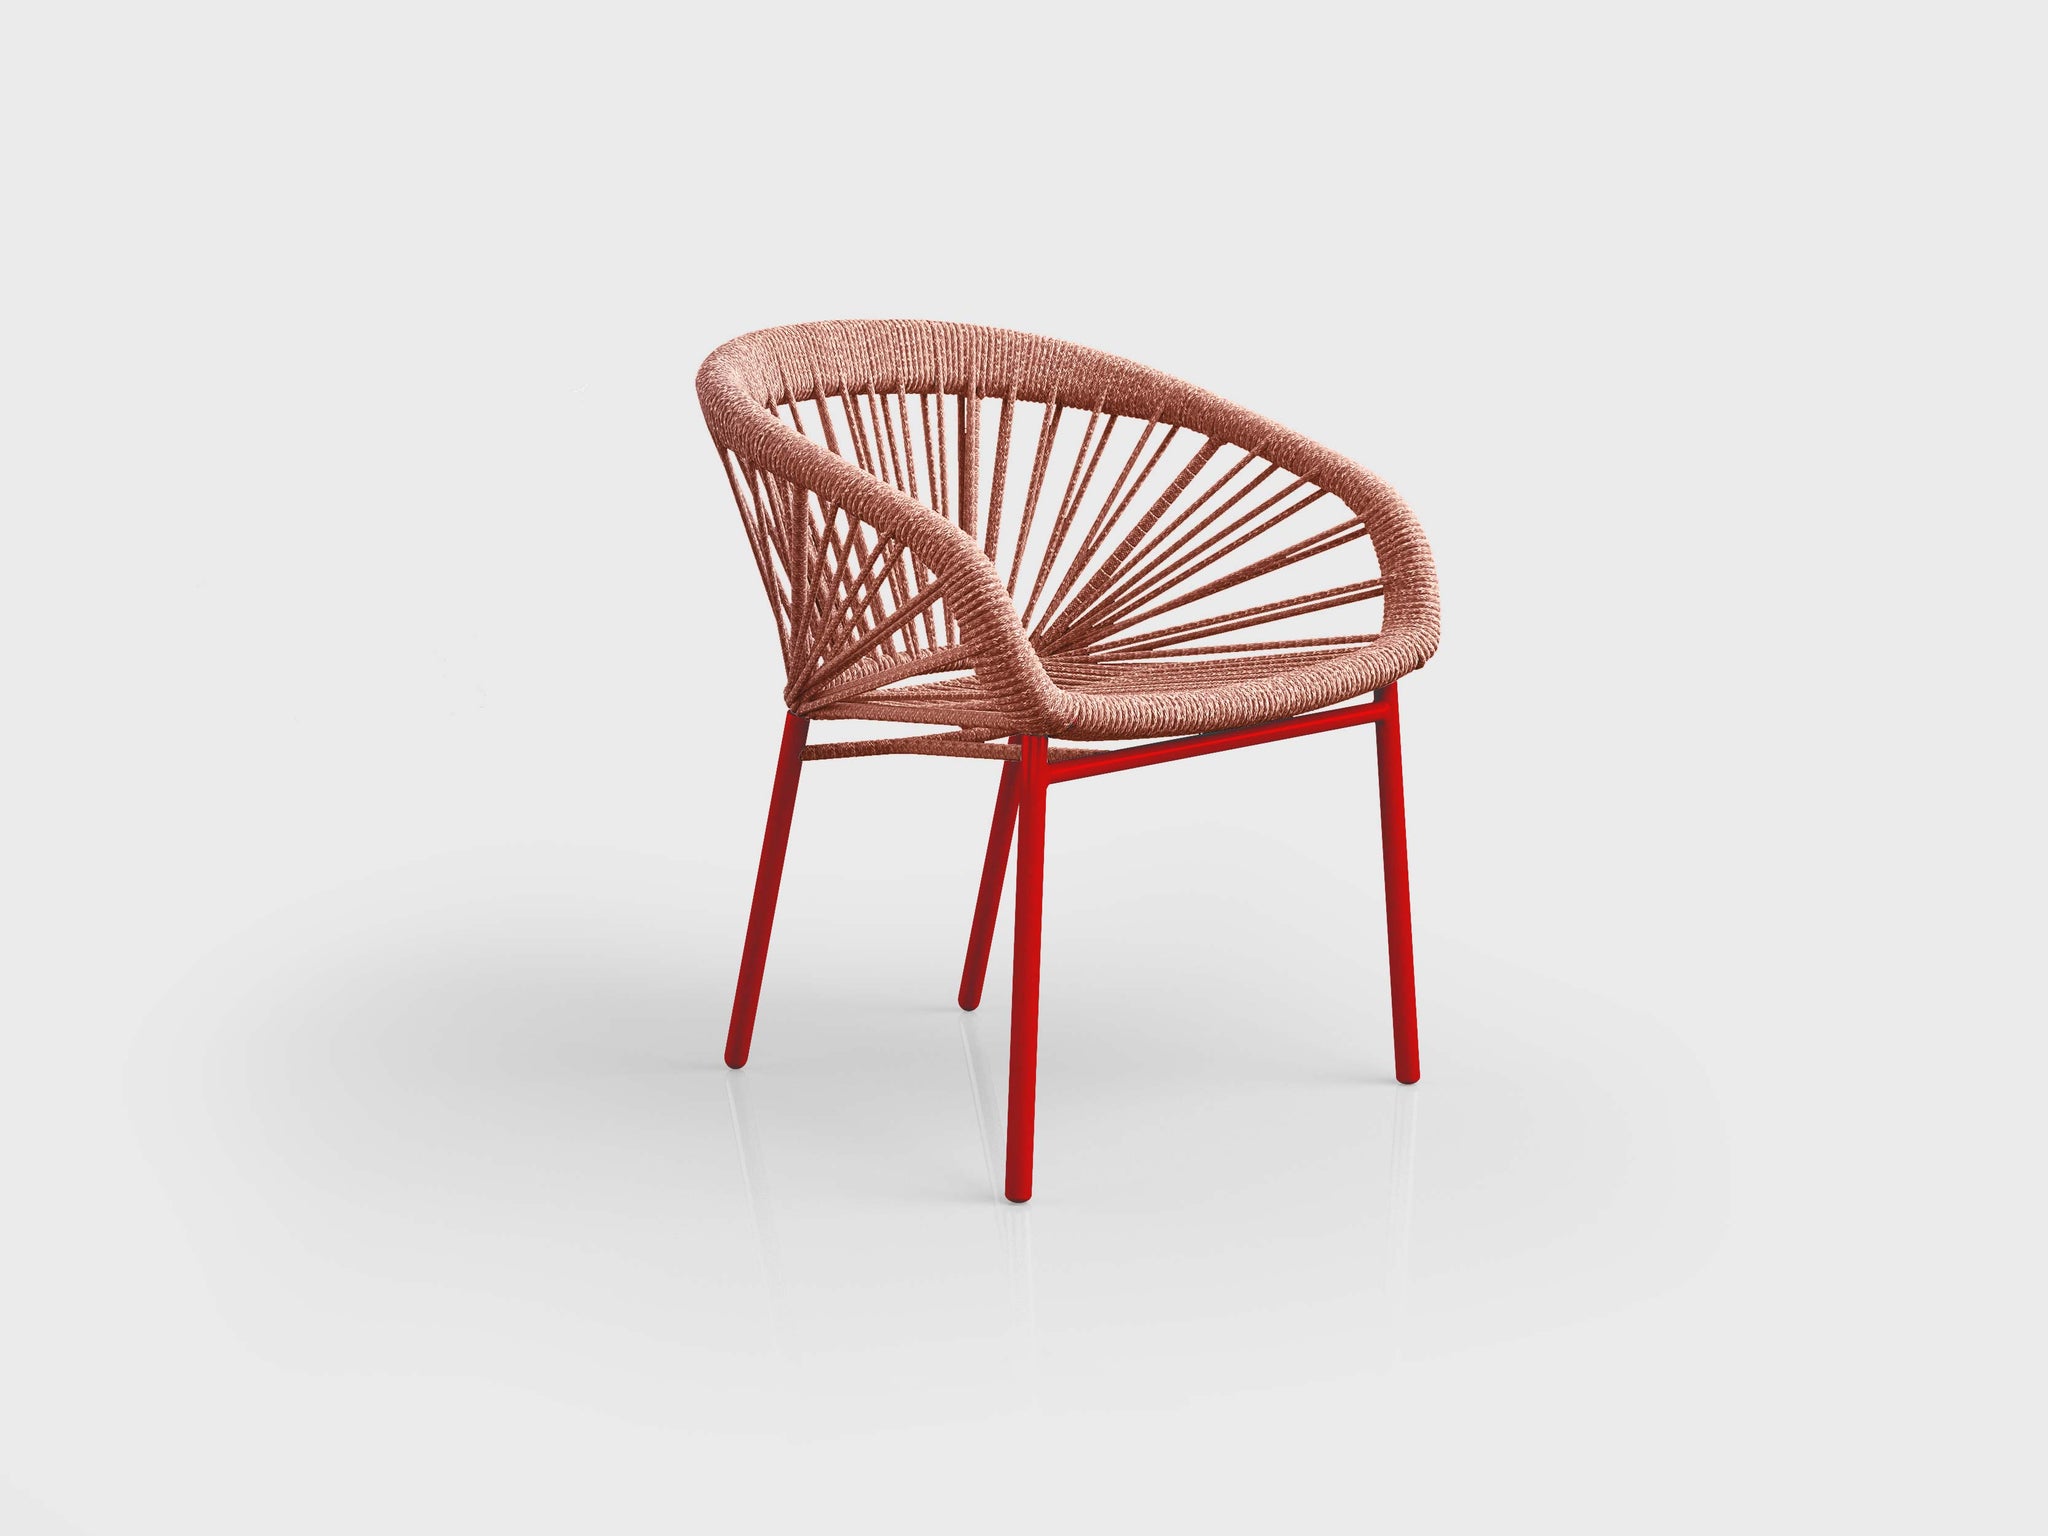 Gamboa Chair with aluminum and wood structure, rope finishing, designed by Manuel Bandeira